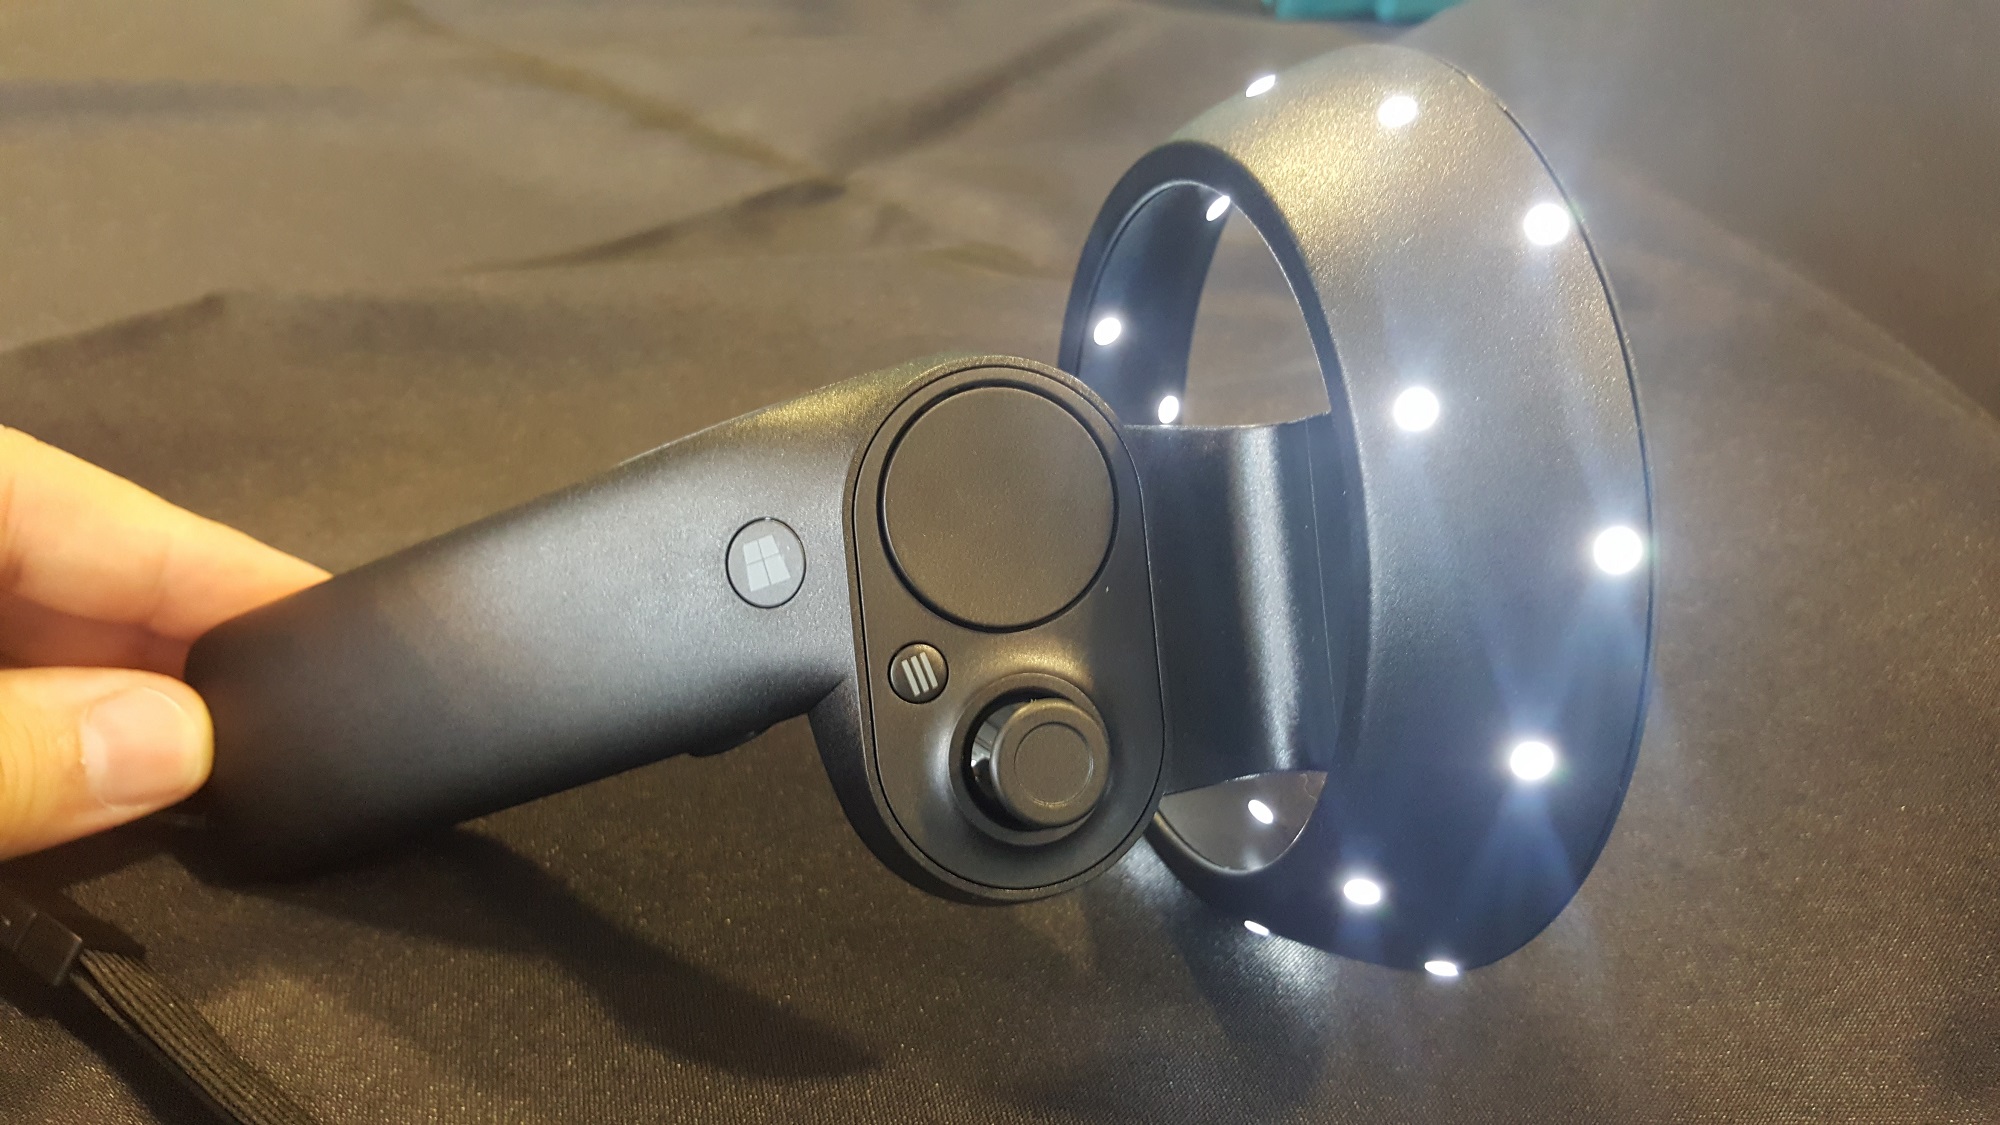 Hands-On With Windows Reality' VR Motion Controllers